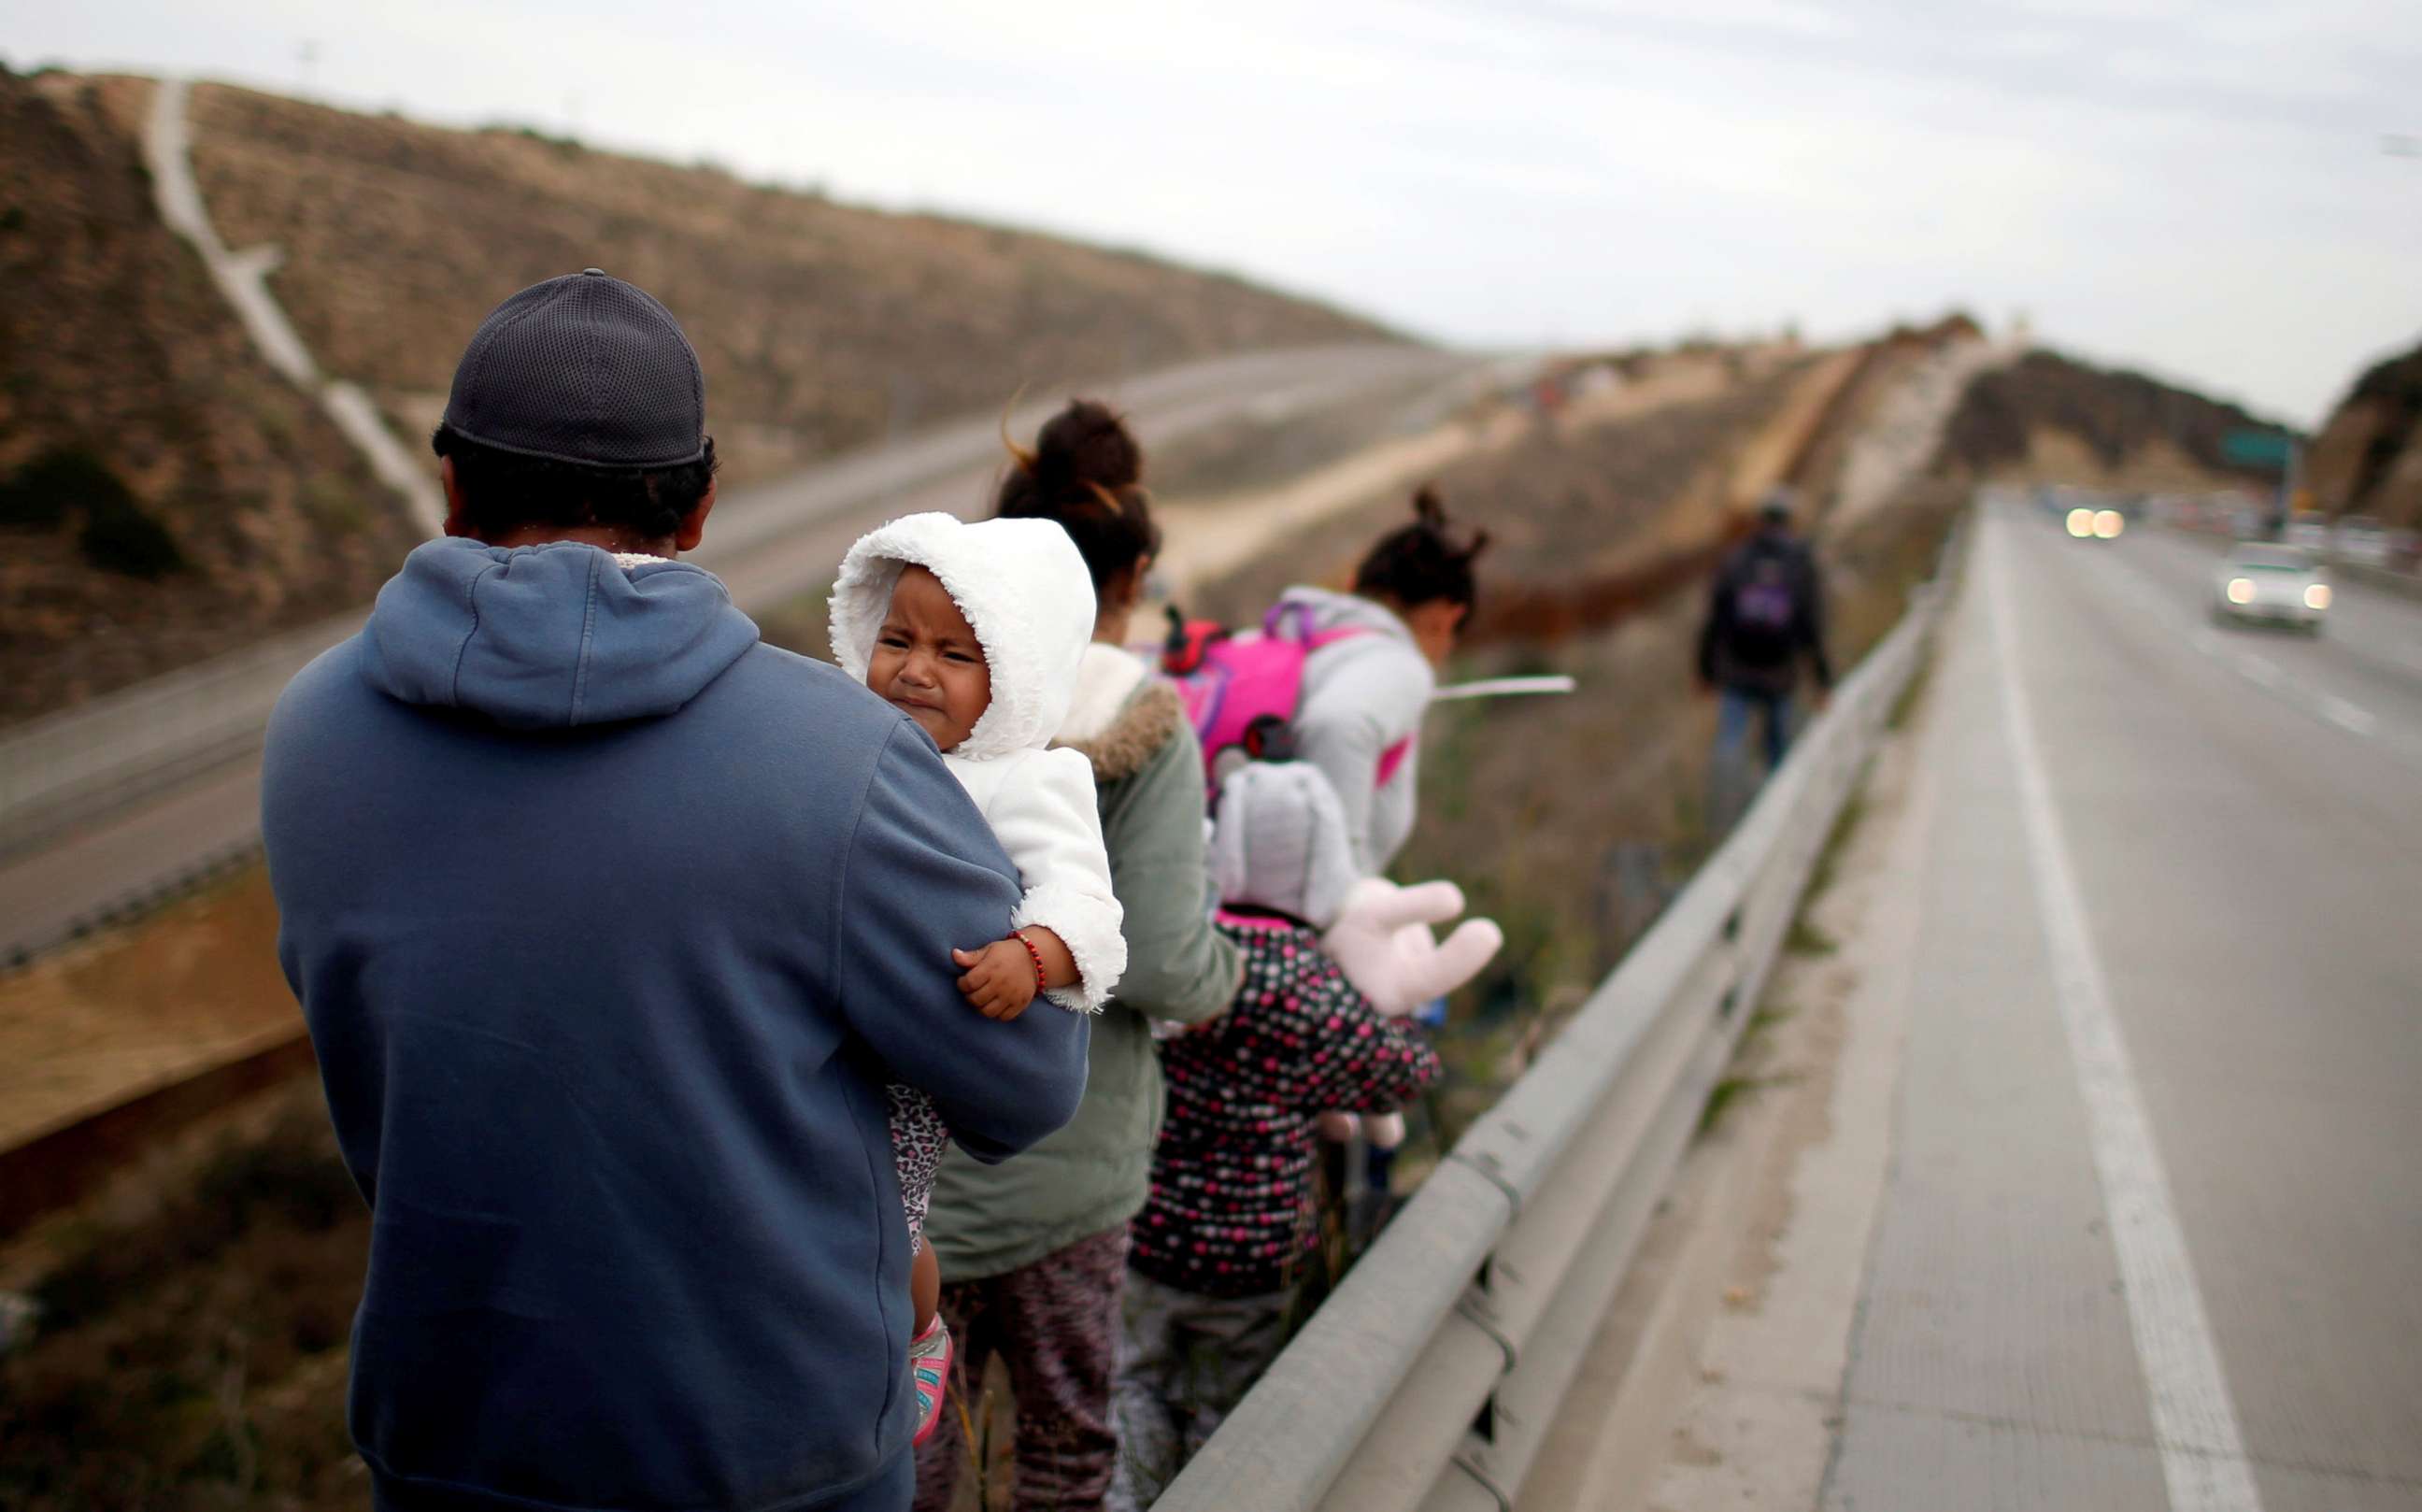 PHOTO: Migrants from Honduras, part of a caravan of thousands from Central America trying to reach the United States, walk next to the border fence as they prepare to cross it illegally in Tijuana, Mexico, Dec. 14, 2018.